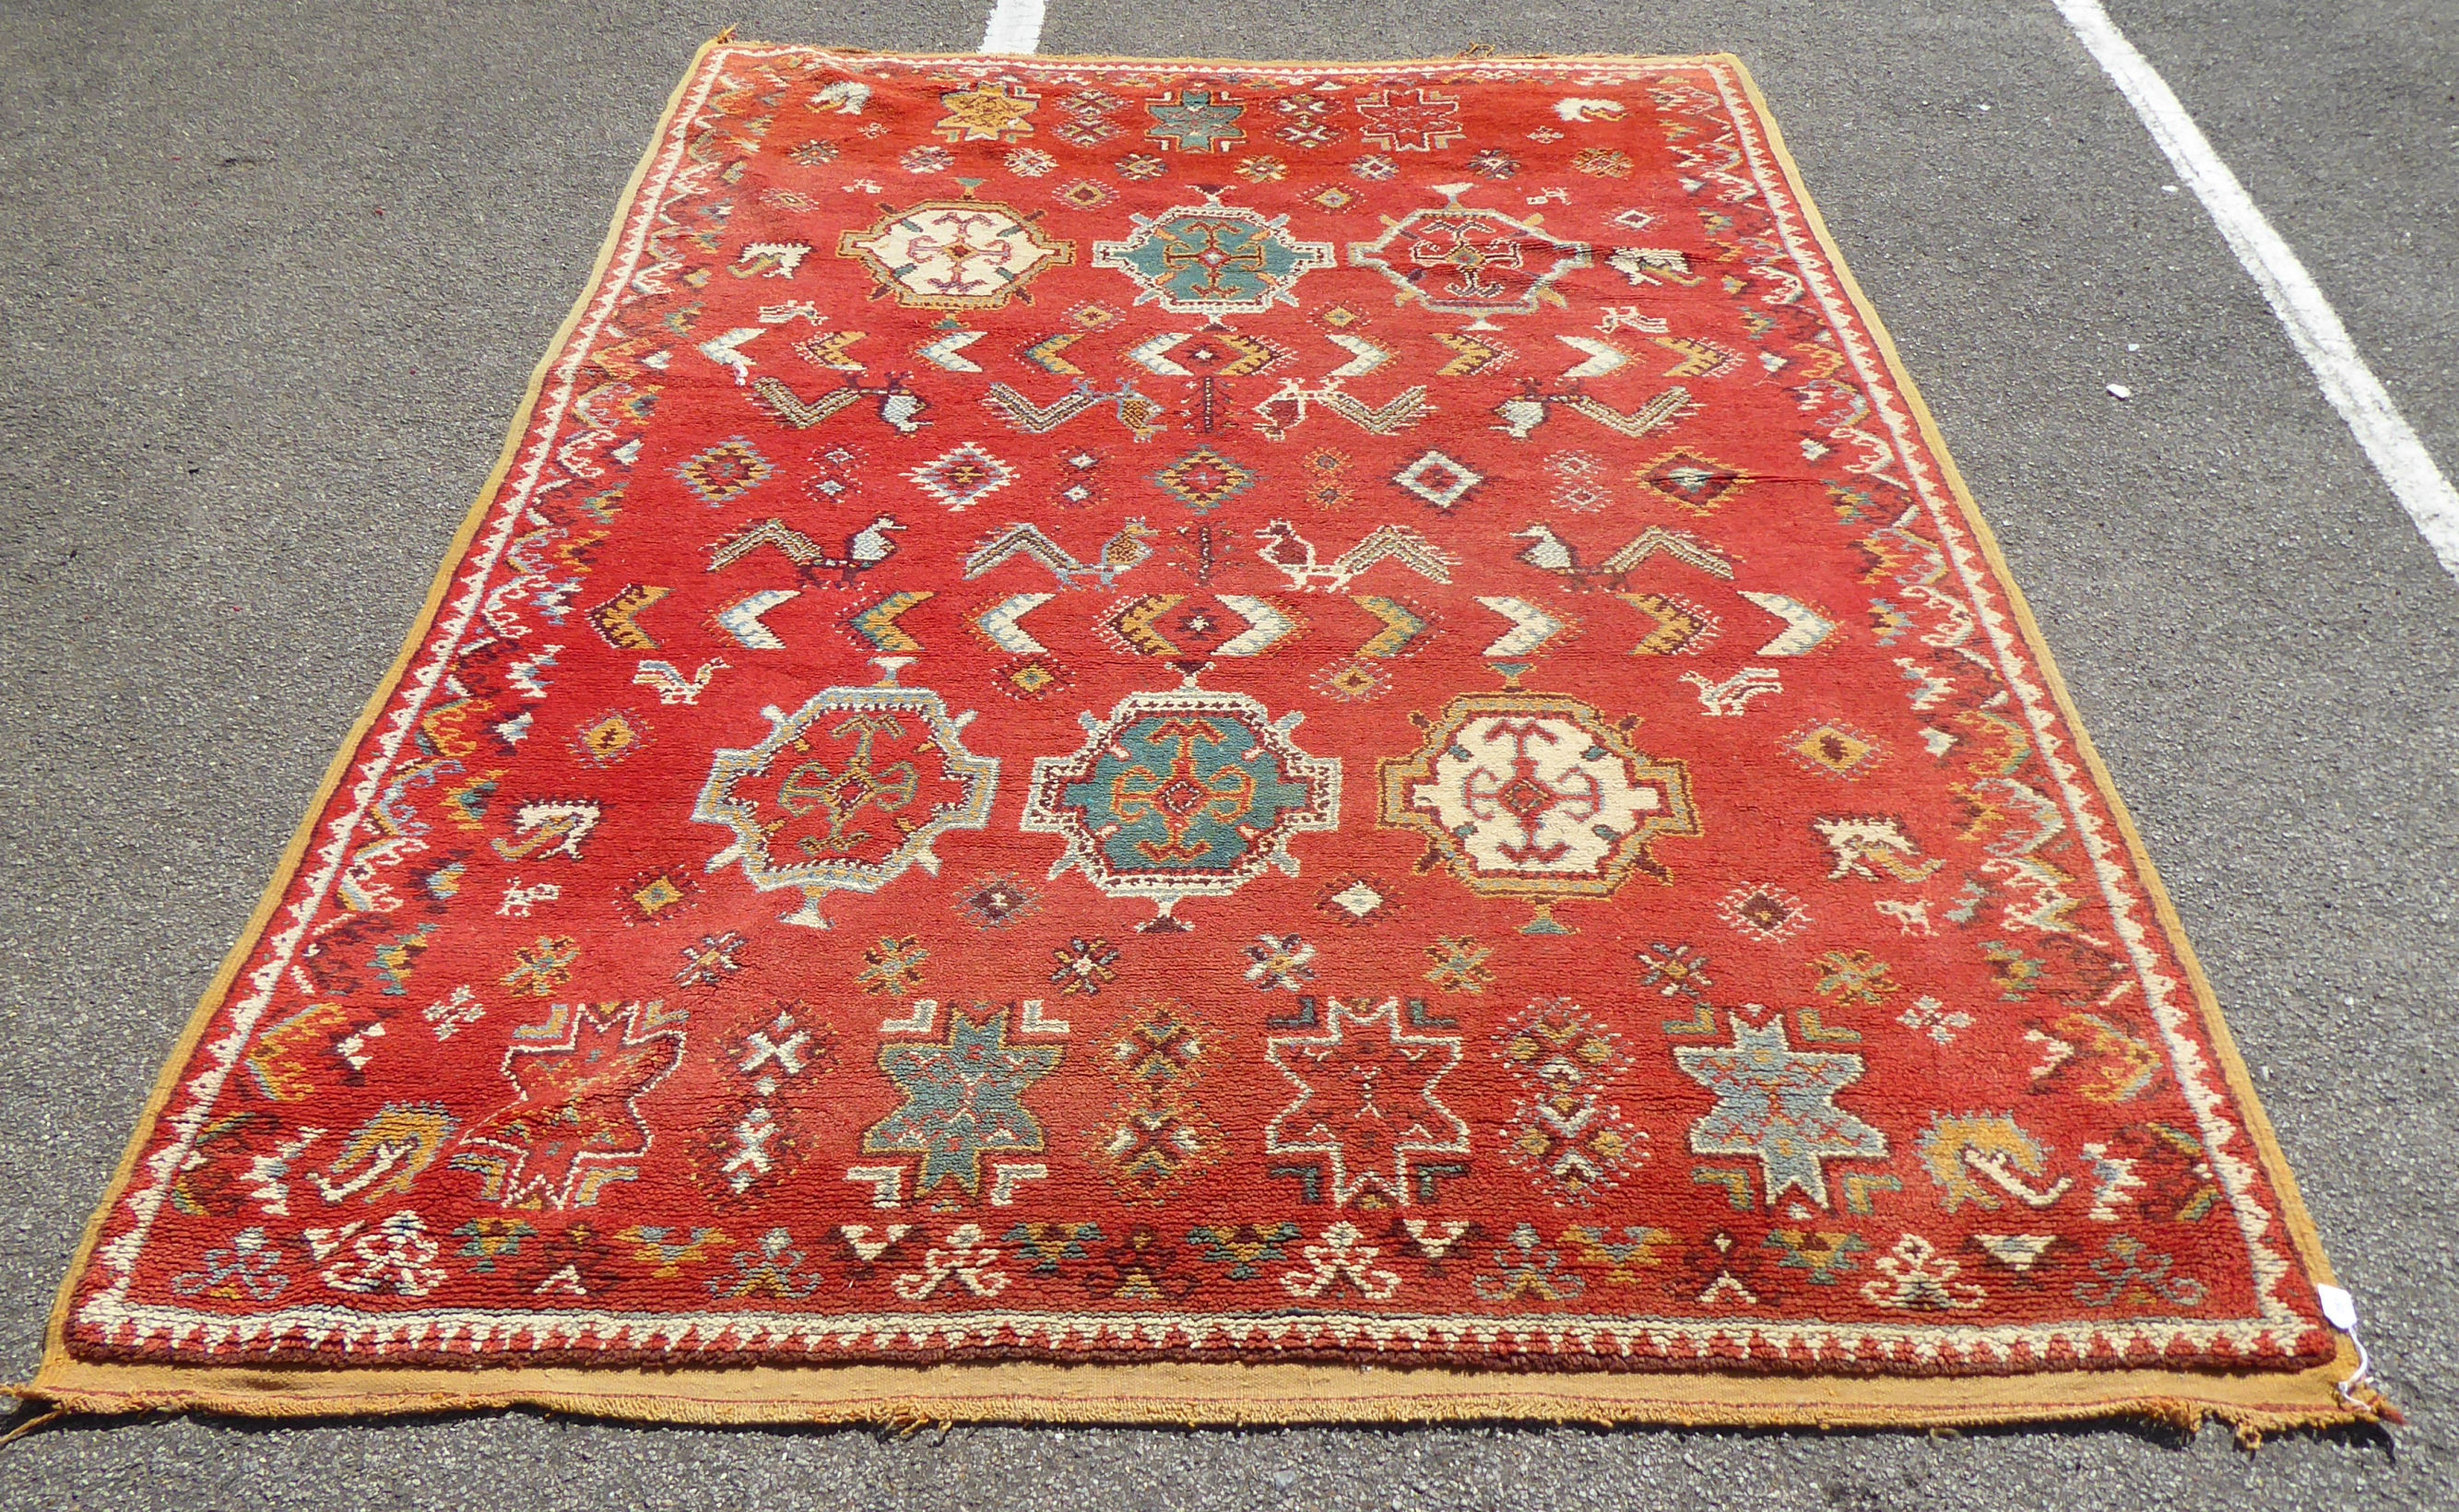 A mid 20thC Turkish carpet with birds and geometric motifs on a red ground  115" x 82"